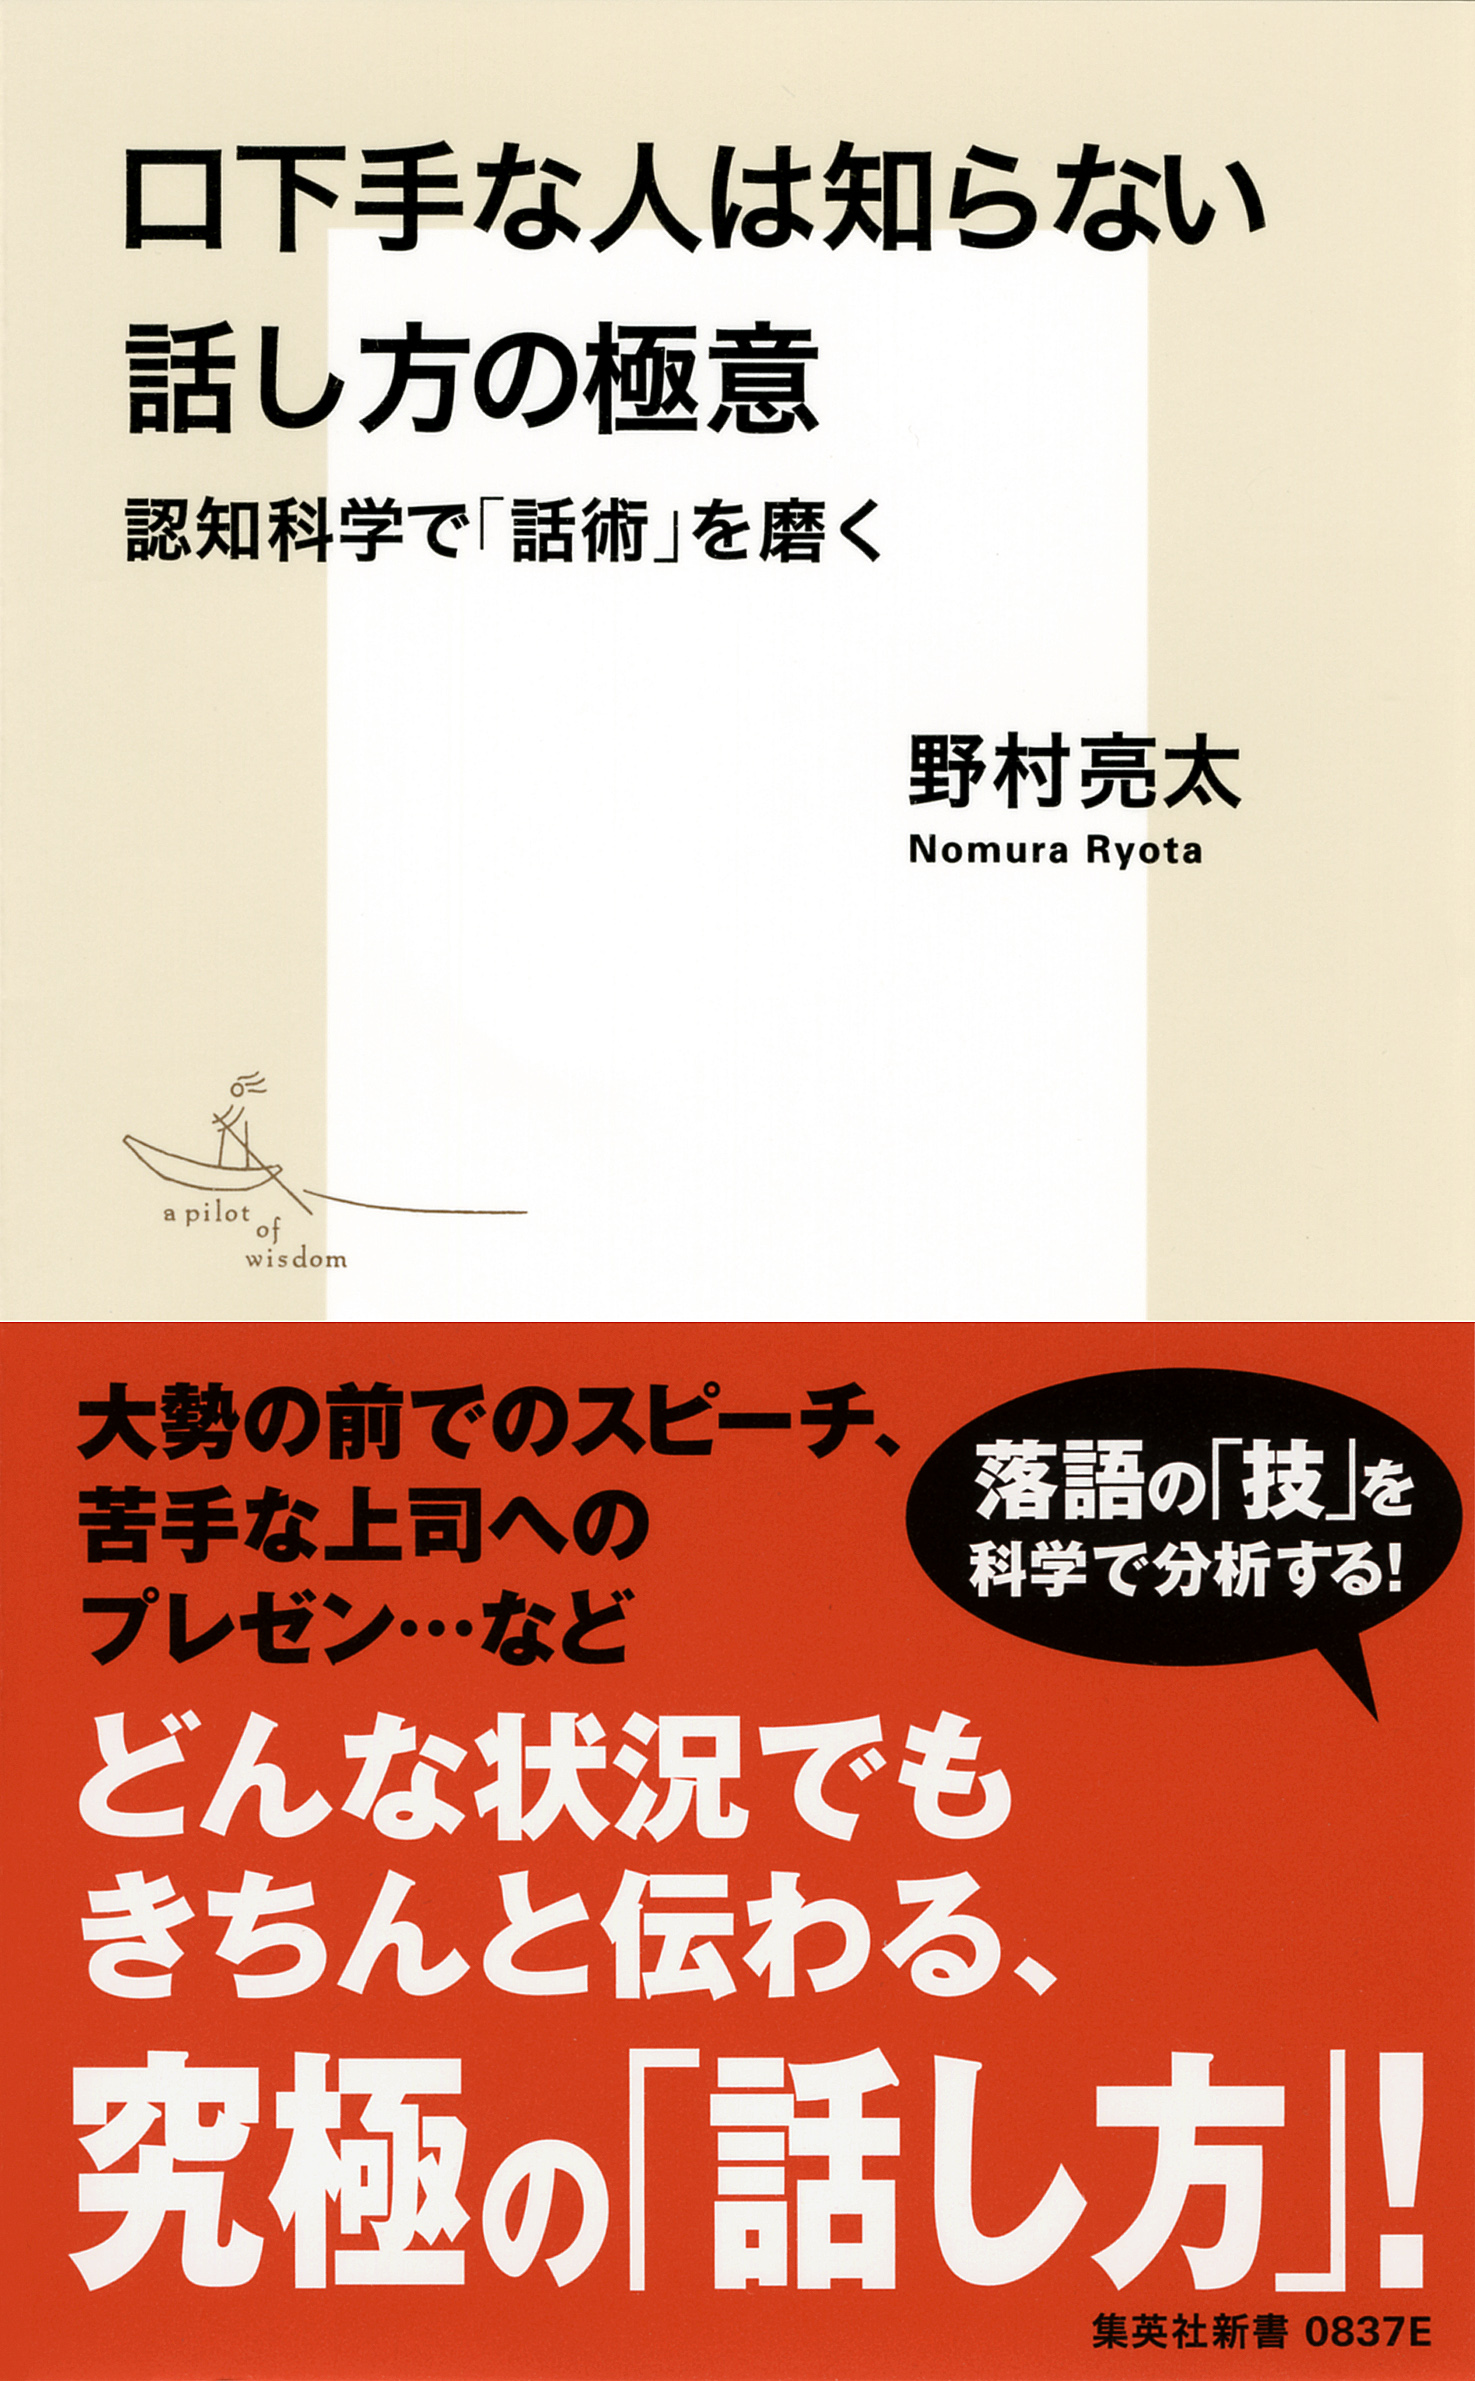 a white square in the center of beige cover with small piece of illustration